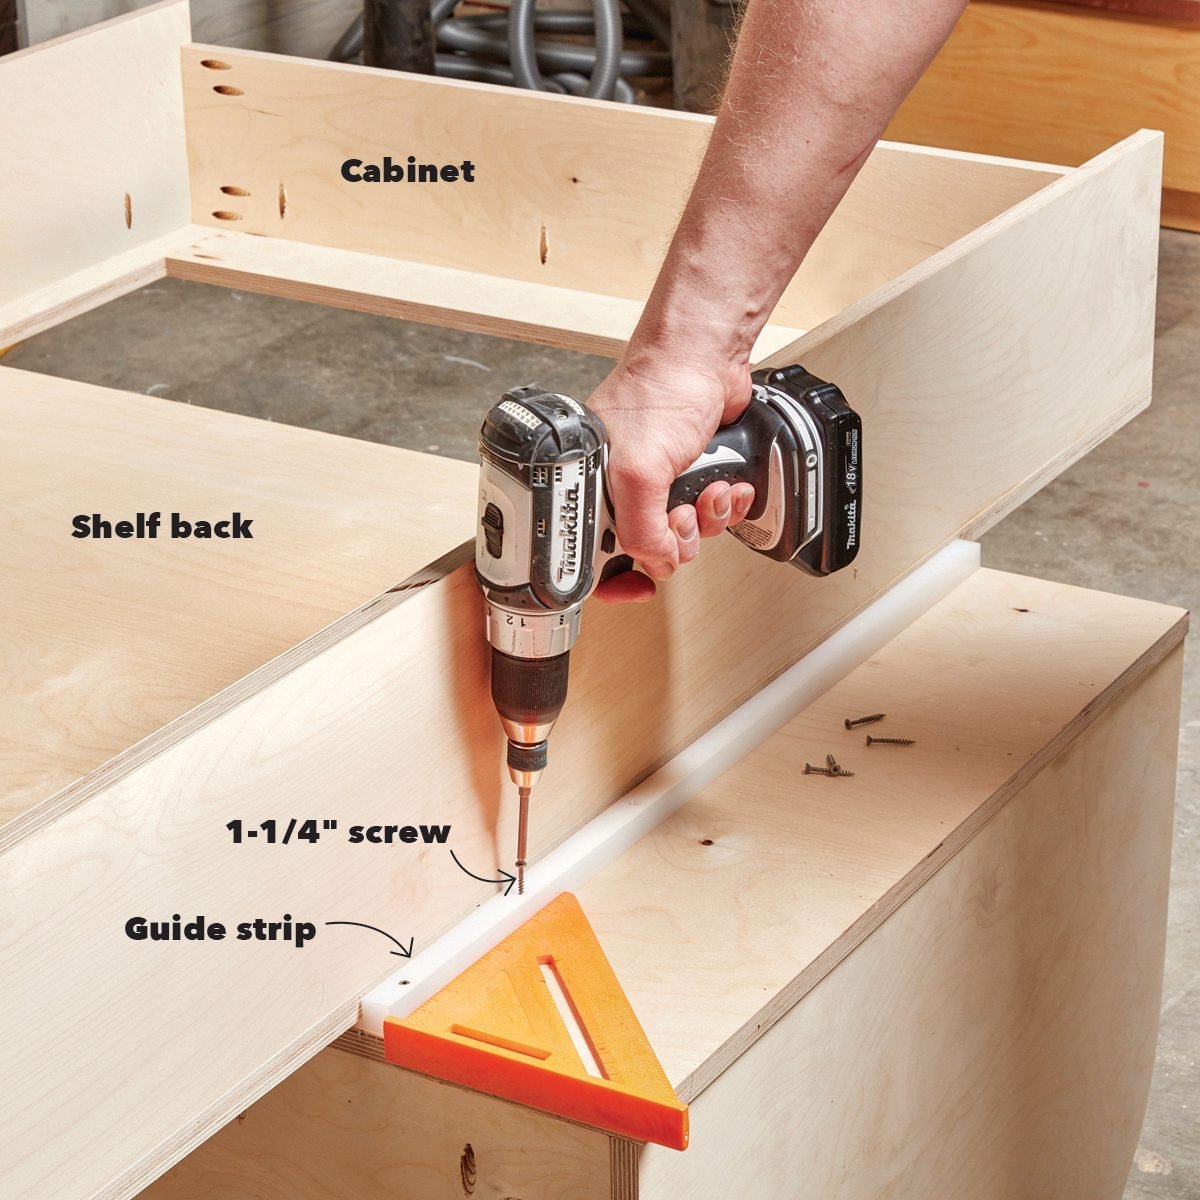 Attaching the guide strips to shelf system